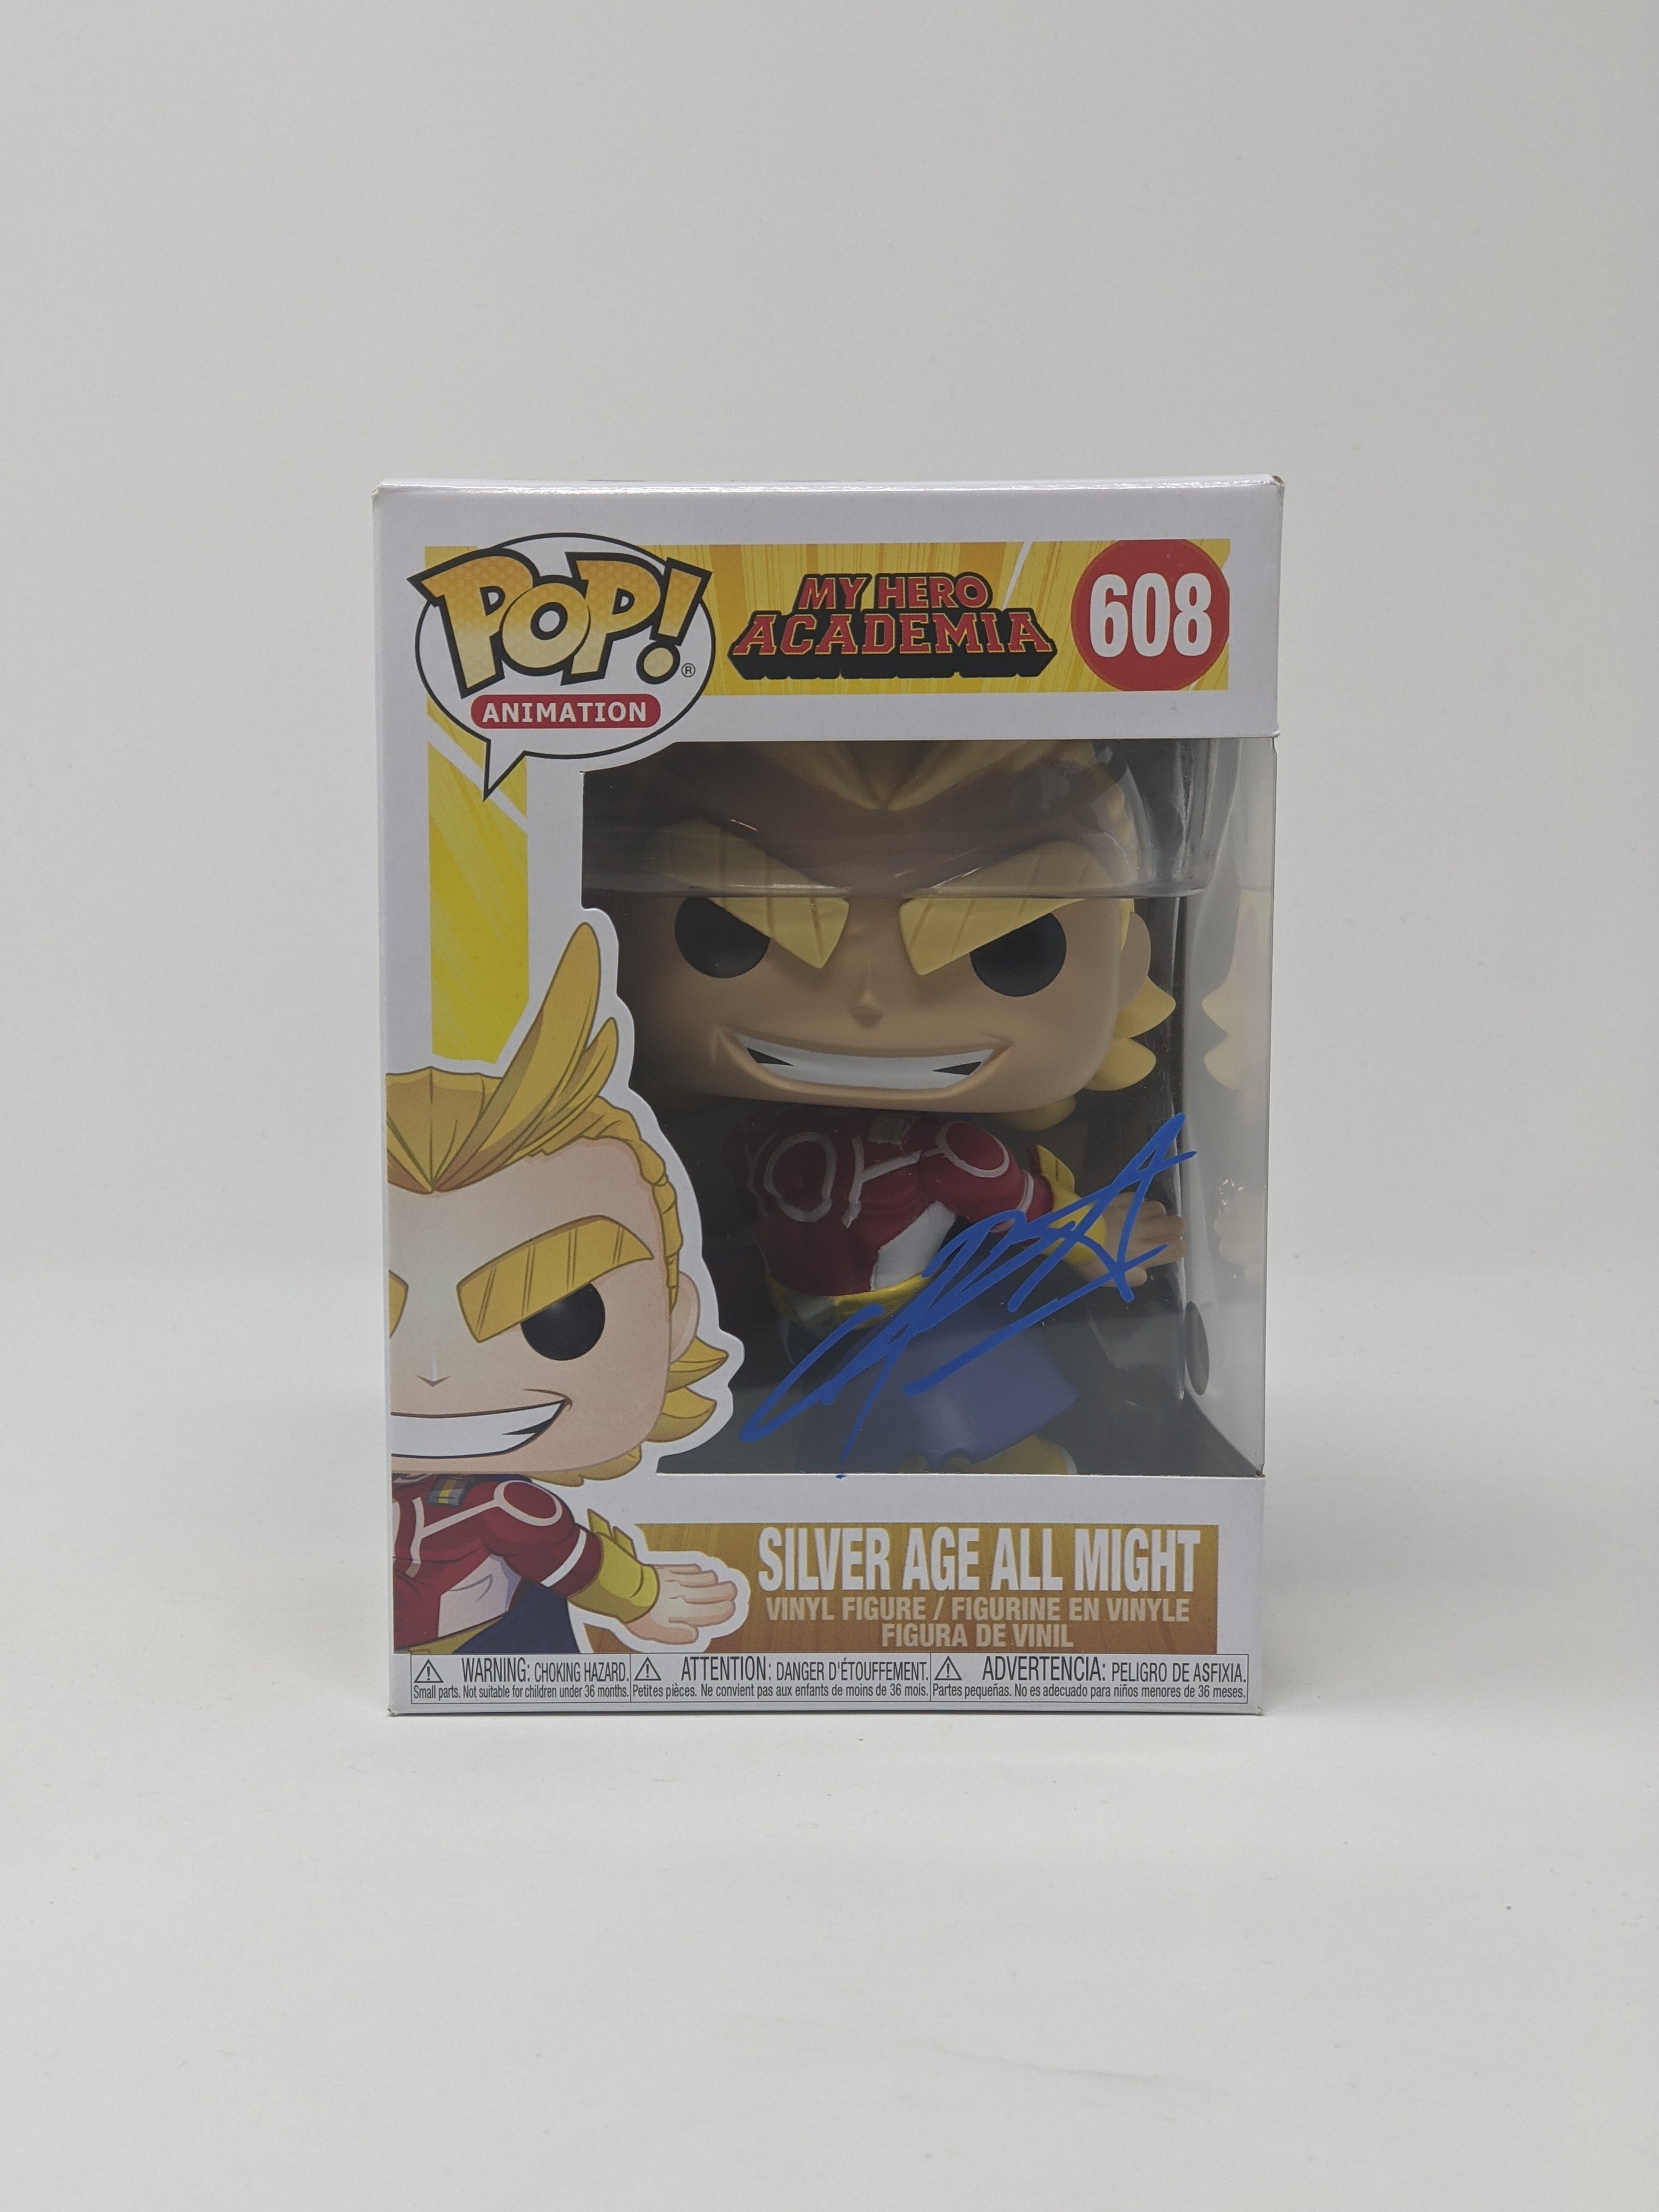 Chris Sabat My Hero Academia Silver Age All Might #608 Signed Funko Pop JSA Certified Autograph